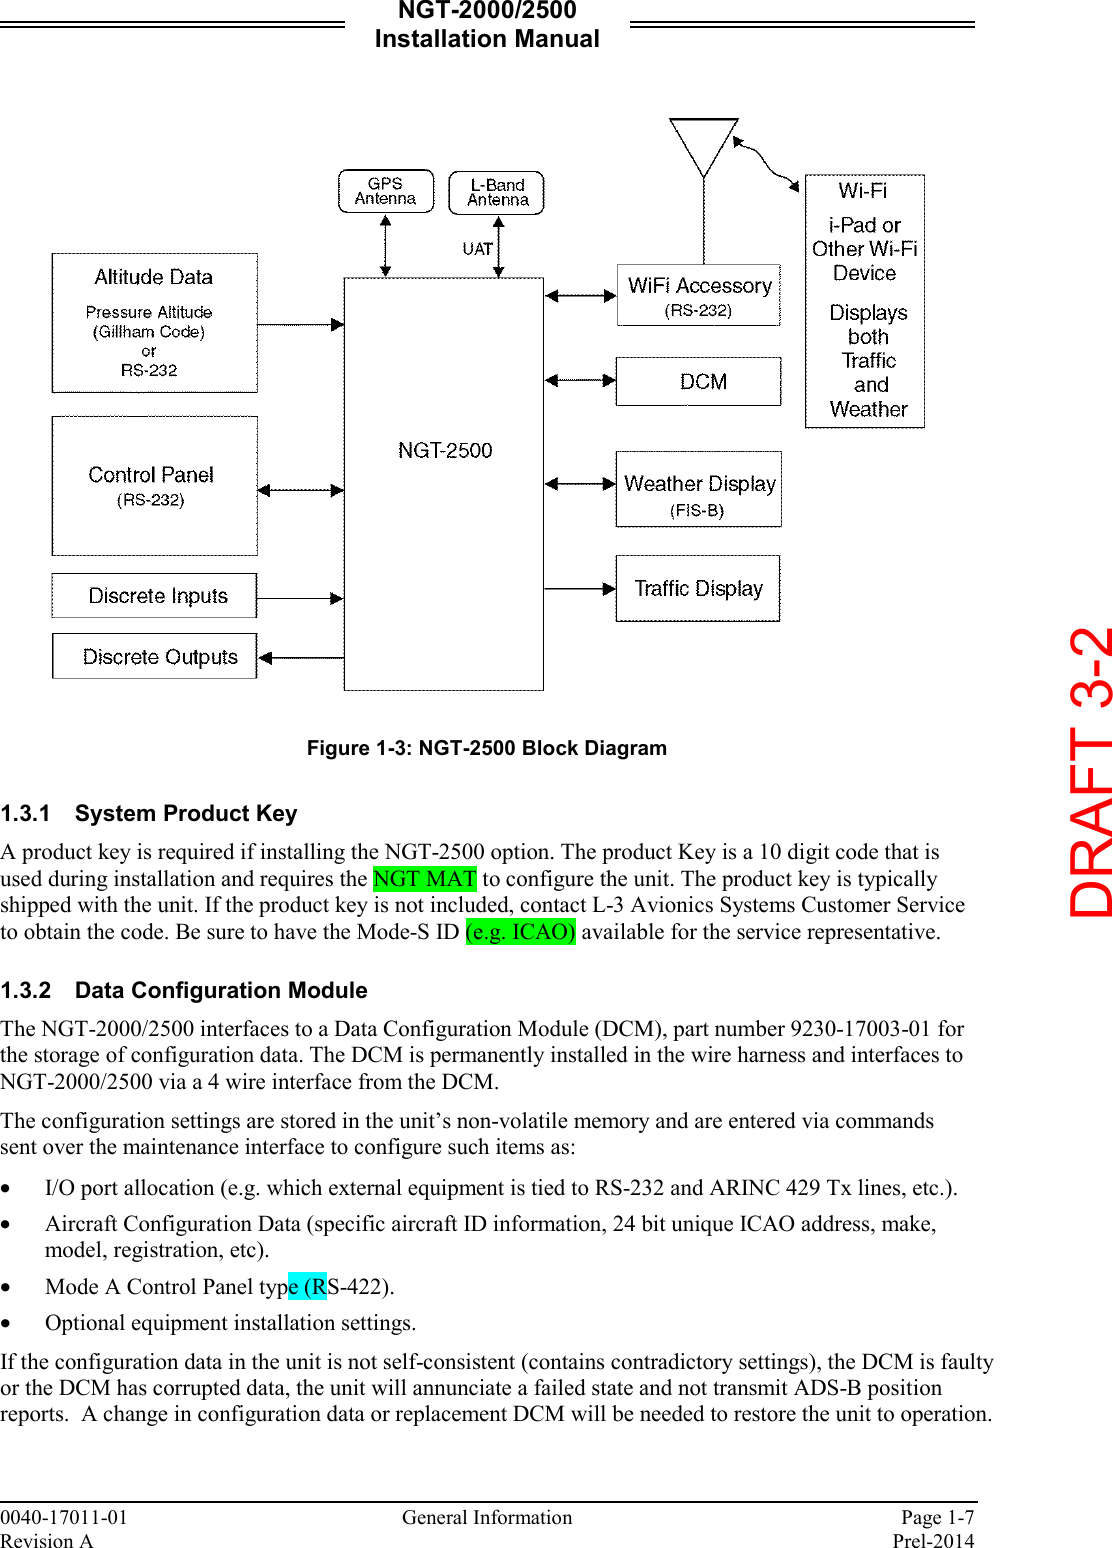 NGT-2000/2500 Installation Manual  0040-17011-01    General Information  Page 1-7 Revision A    Prel-2014    Figure 1-3: NGT-2500 Block Diagram  1.3.1 System Product Key A product key is required if installing the NGT-2500 option. The product Key is a 10 digit code that is used during installation and requires the NGT MAT to configure the unit. The product key is typically shipped with the unit. If the product key is not included, contact L-3 Avionics Systems Customer Service to obtain the code. Be sure to have the Mode-S ID (e.g. ICAO) available for the service representative.  1.3.2 Data Configuration Module The NGT-2000/2500 interfaces to a Data Configuration Module (DCM), part number 9230-17003-01 for the storage of configuration data. The DCM is permanently installed in the wire harness and interfaces to NGT-2000/2500 via a 4 wire interface from the DCM.   The configuration settings are stored in the unit’s non-volatile memory and are entered via commands sent over the maintenance interface to configure such items as:    • I/O port allocation (e.g. which external equipment is tied to RS-232 and ARINC 429 Tx lines, etc.). • Aircraft Configuration Data (specific aircraft ID information, 24 bit unique ICAO address, make, model, registration, etc). • Mode A Control Panel type (RS-422). • Optional equipment installation settings. If the configuration data in the unit is not self-consistent (contains contradictory settings), the DCM is faulty or the DCM has corrupted data, the unit will annunciate a failed state and not transmit ADS-B position reports.  A change in configuration data or replacement DCM will be needed to restore the unit to operation.    DRAFT 3-2